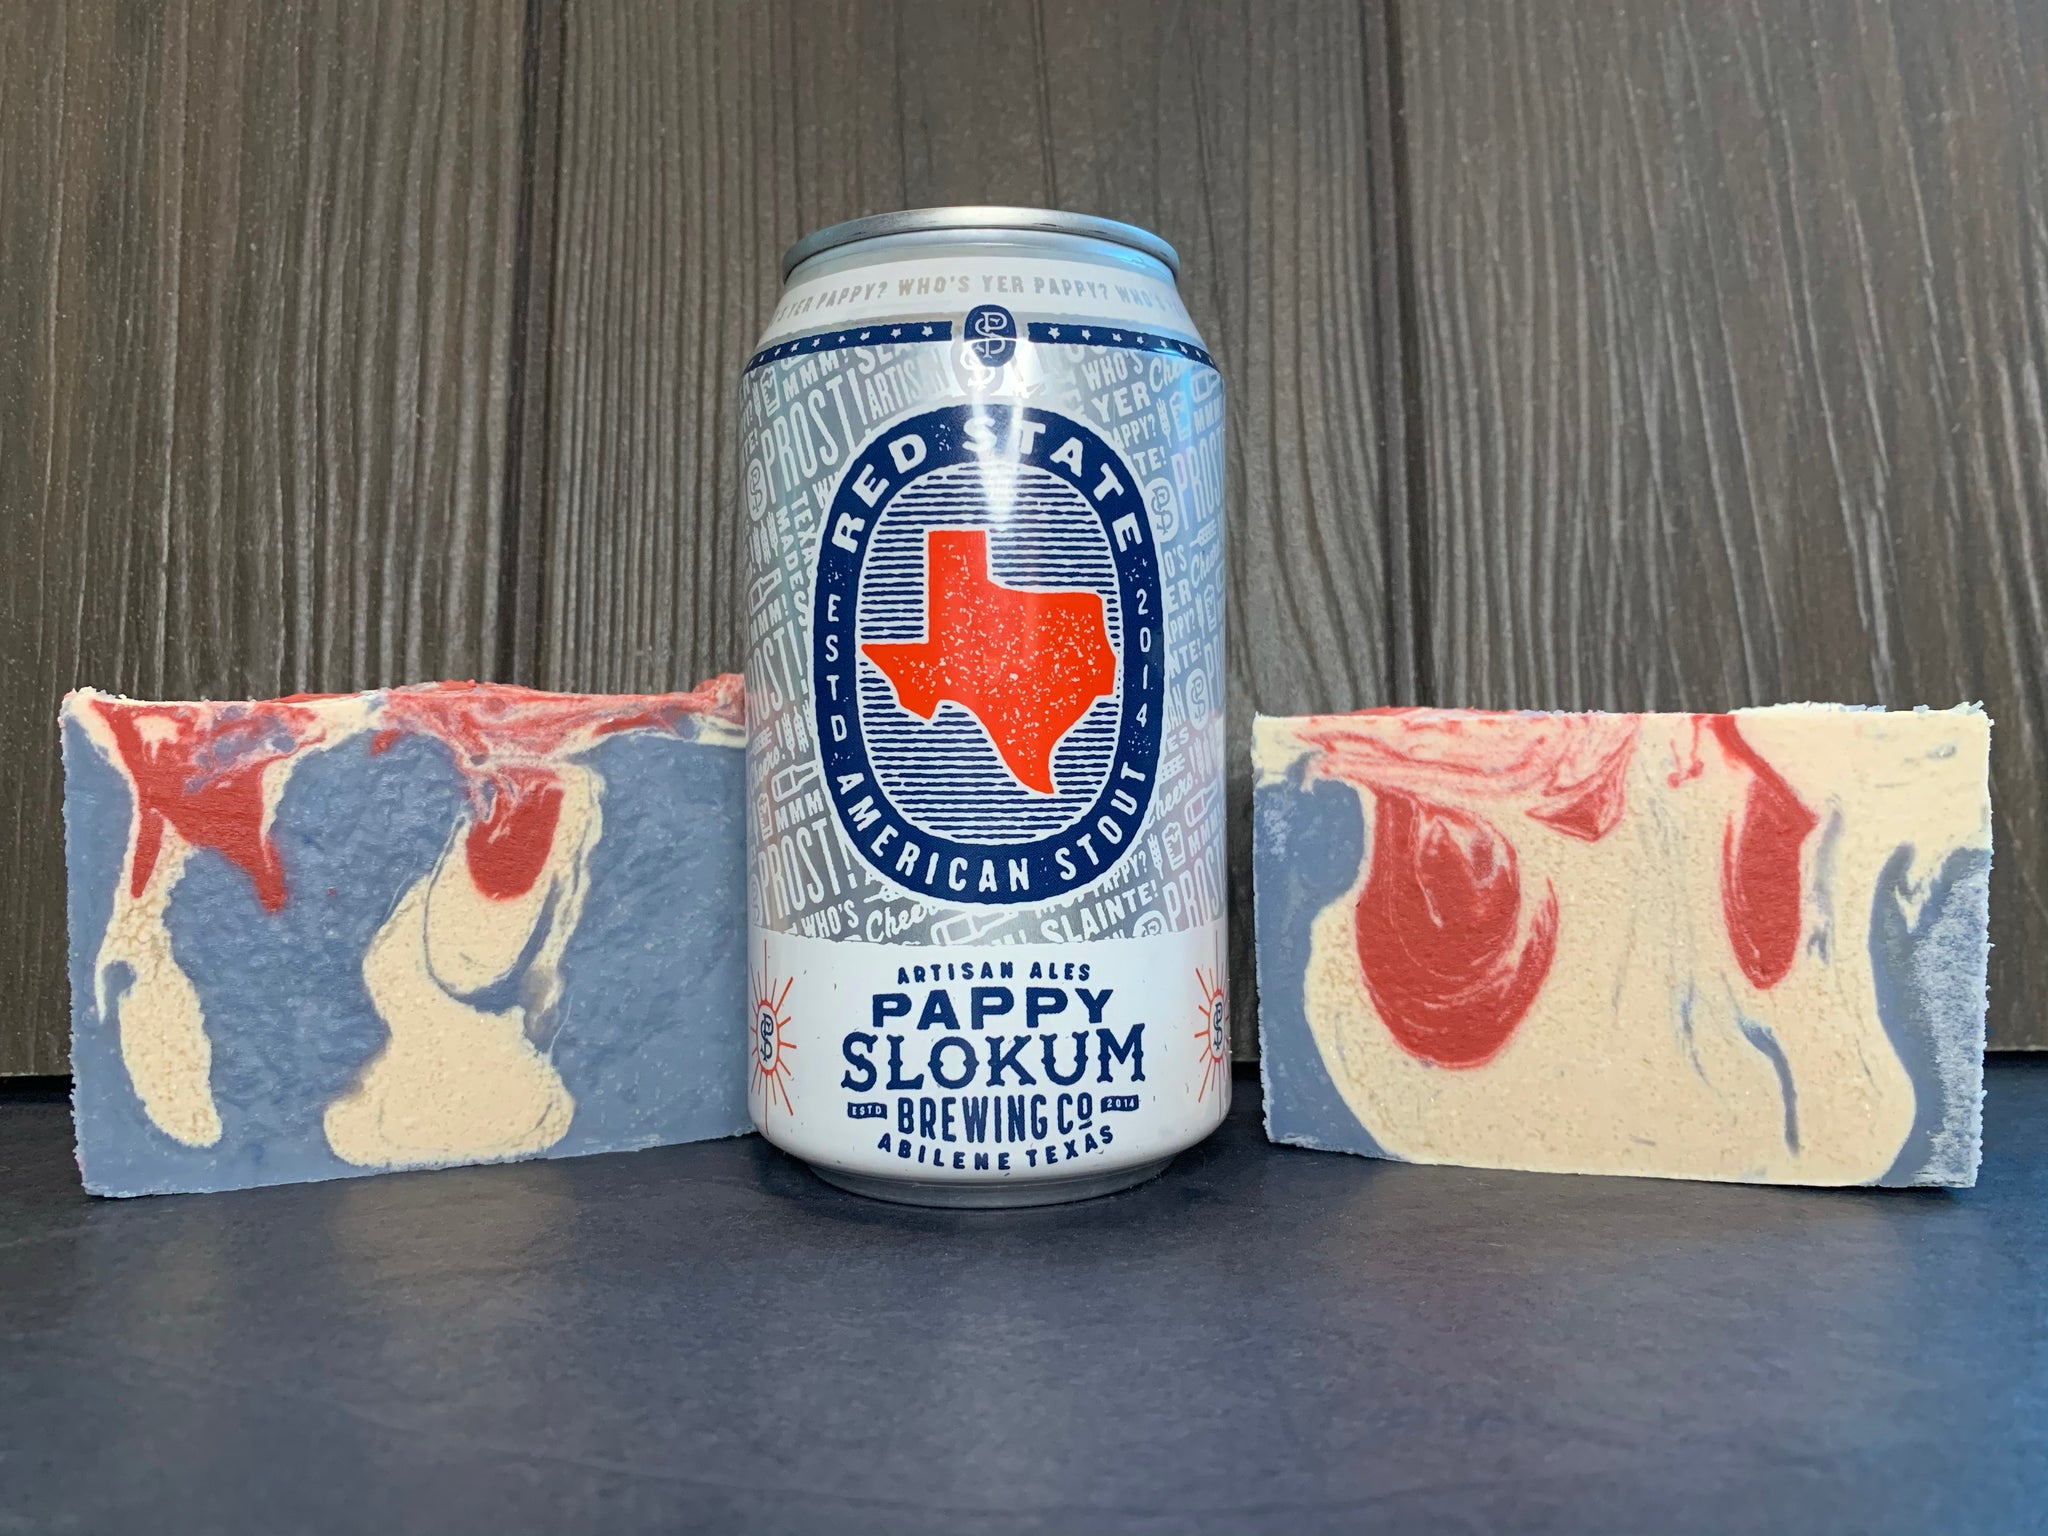 texas beer soap handmade in texas with red state American stout from pappy slokum brewing co Abilene texas brewery red white and blue beer soap for him handmade in texas spunkndisorderly